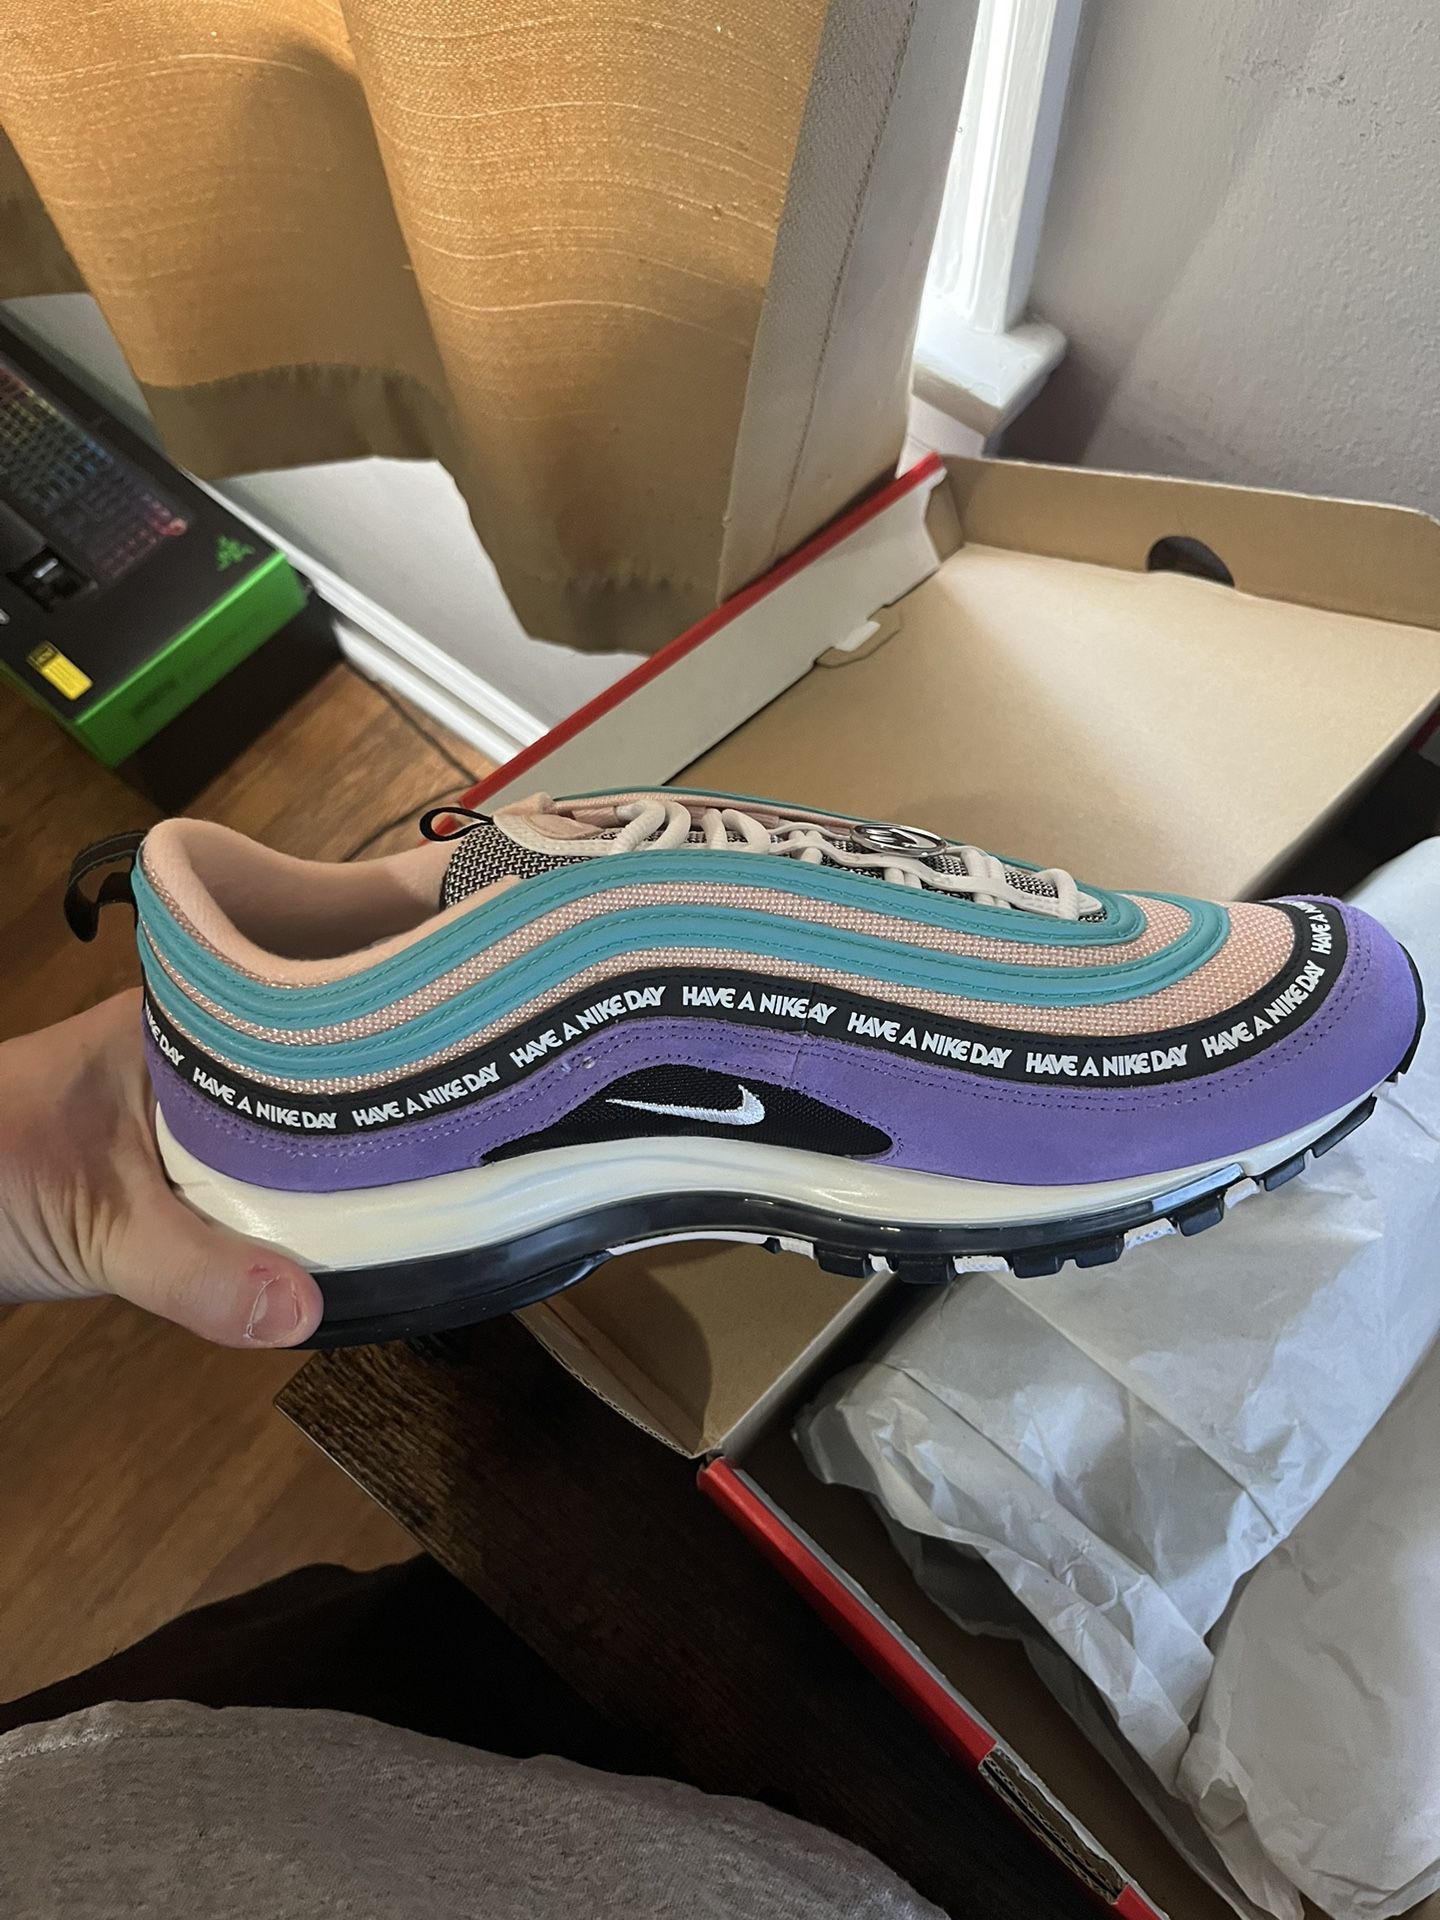 Nike Air Max 97 “Have A Nike Day” SZ 11